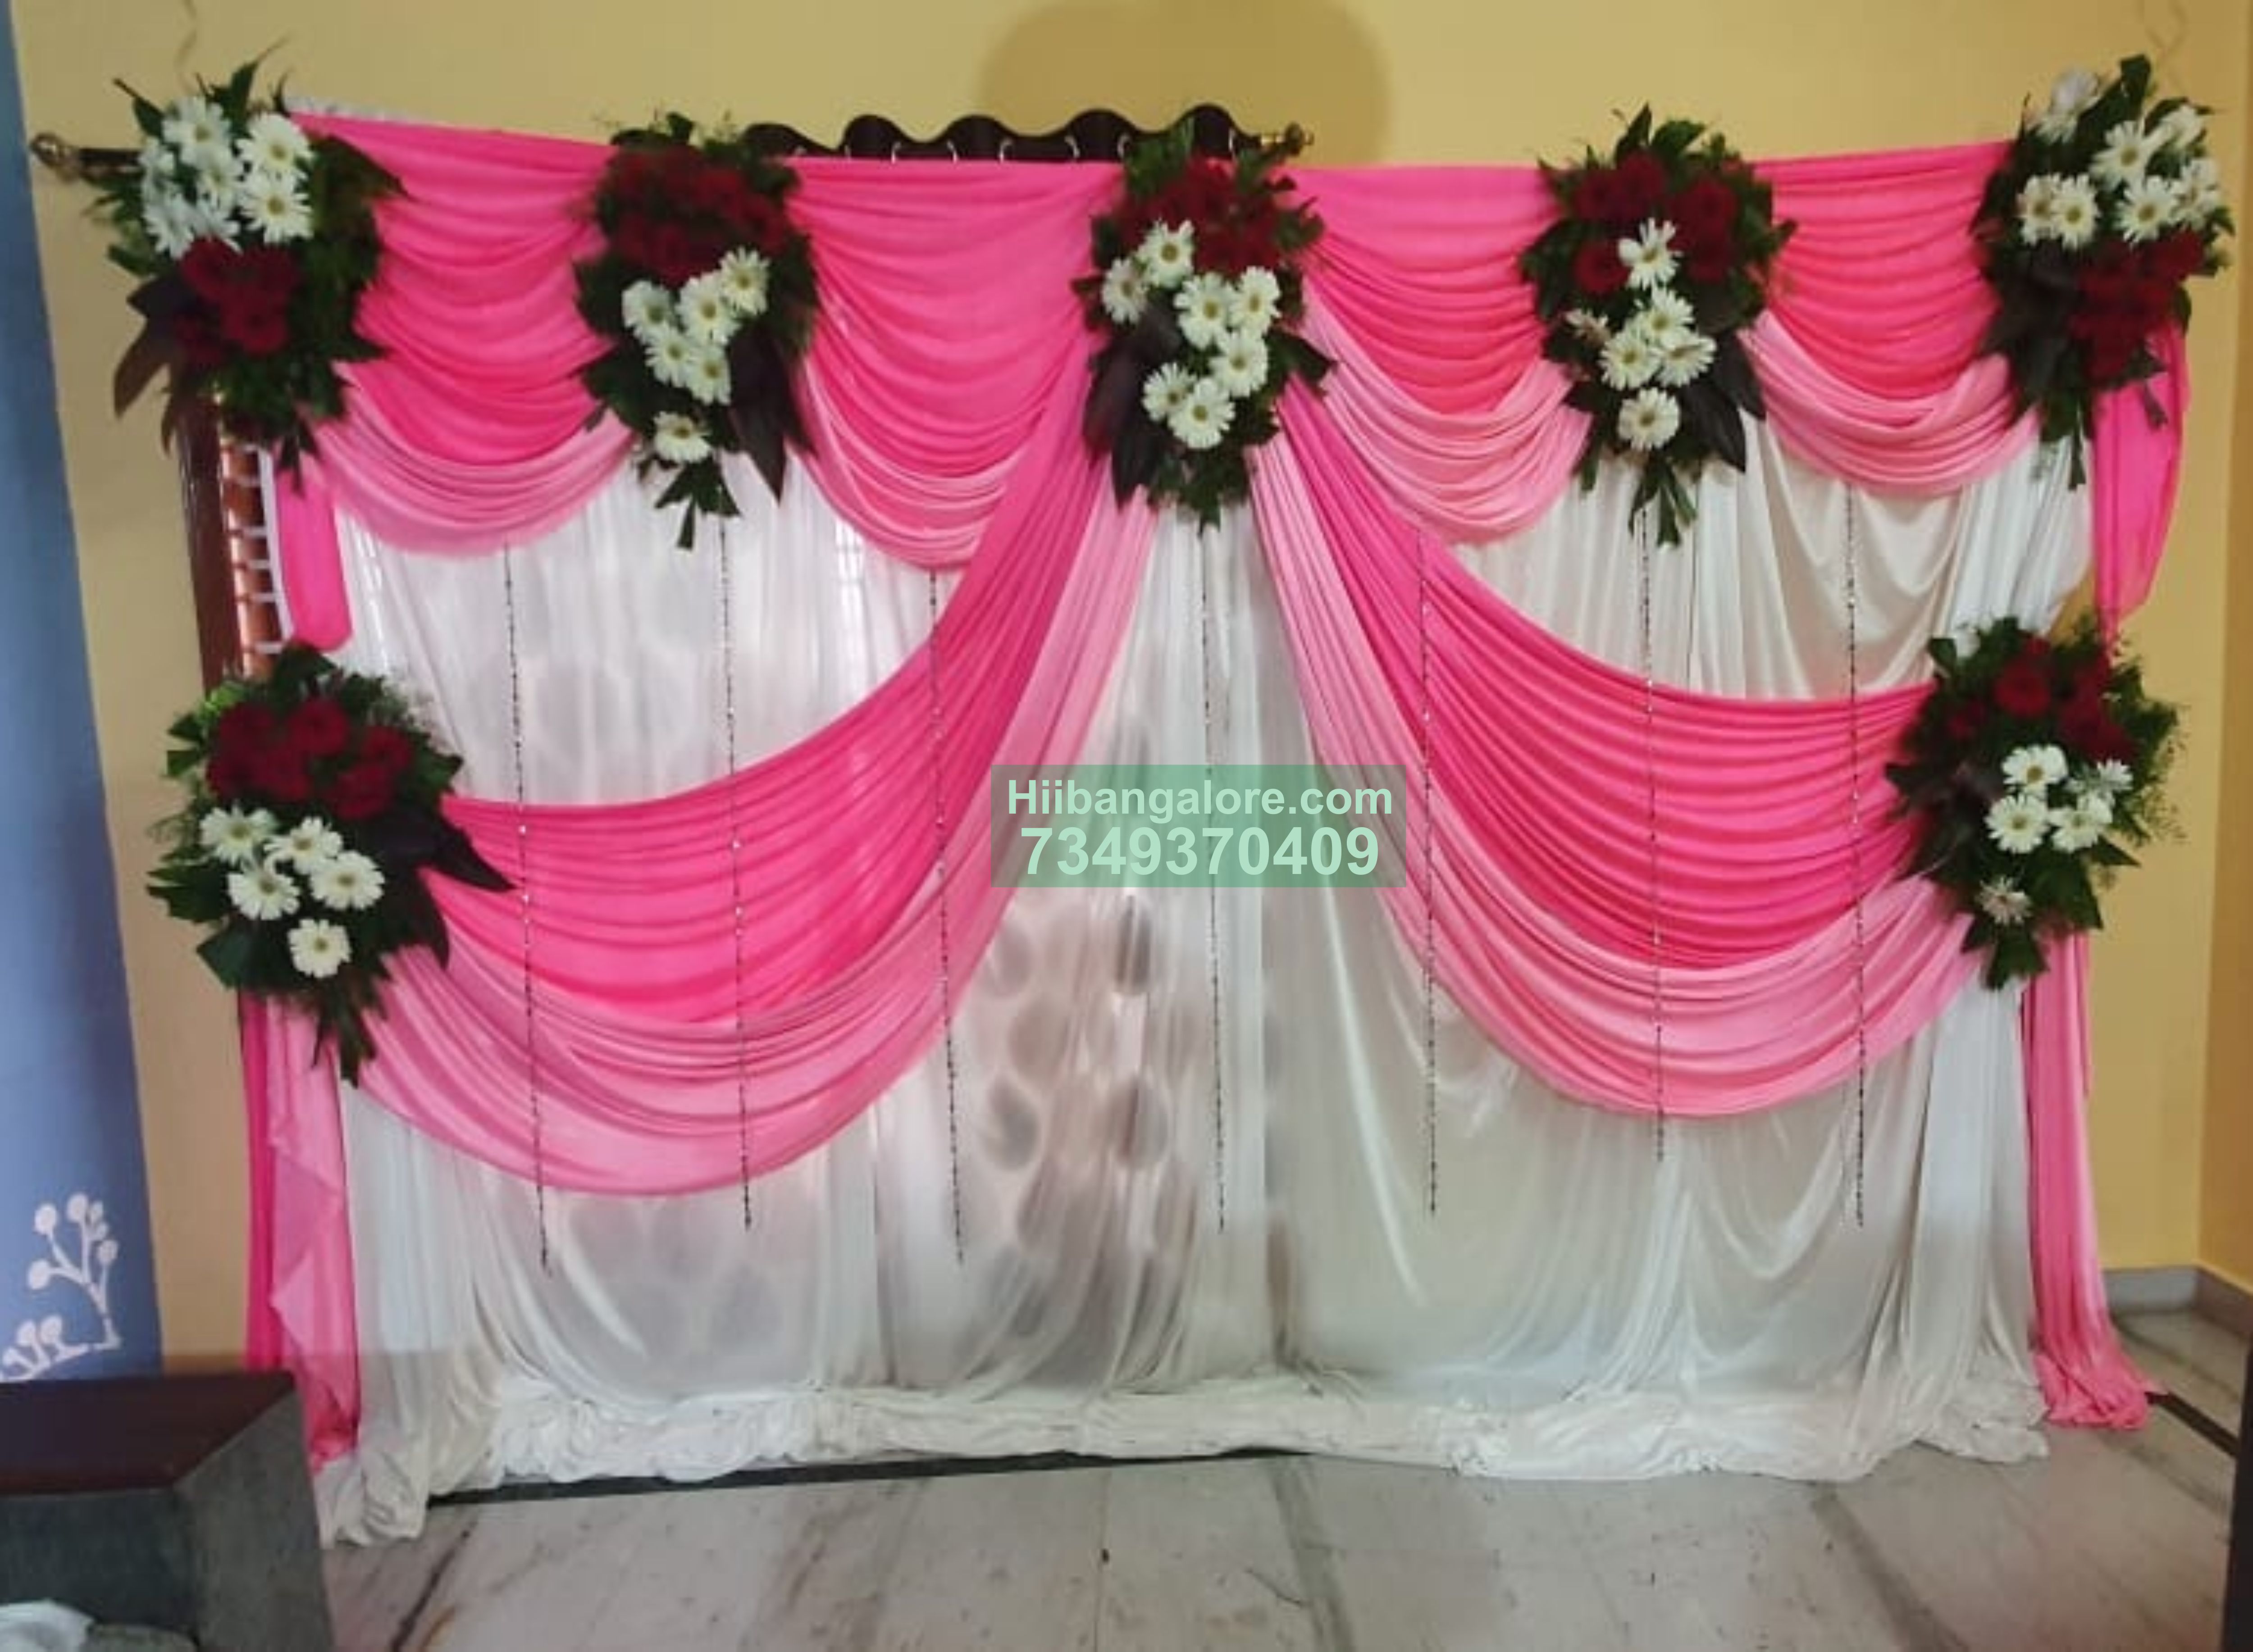 Naming ceremony decorations bangalore - Best Birthday Party Organisers,  Balloon decorators, Birthday party Caterers in Bangalore